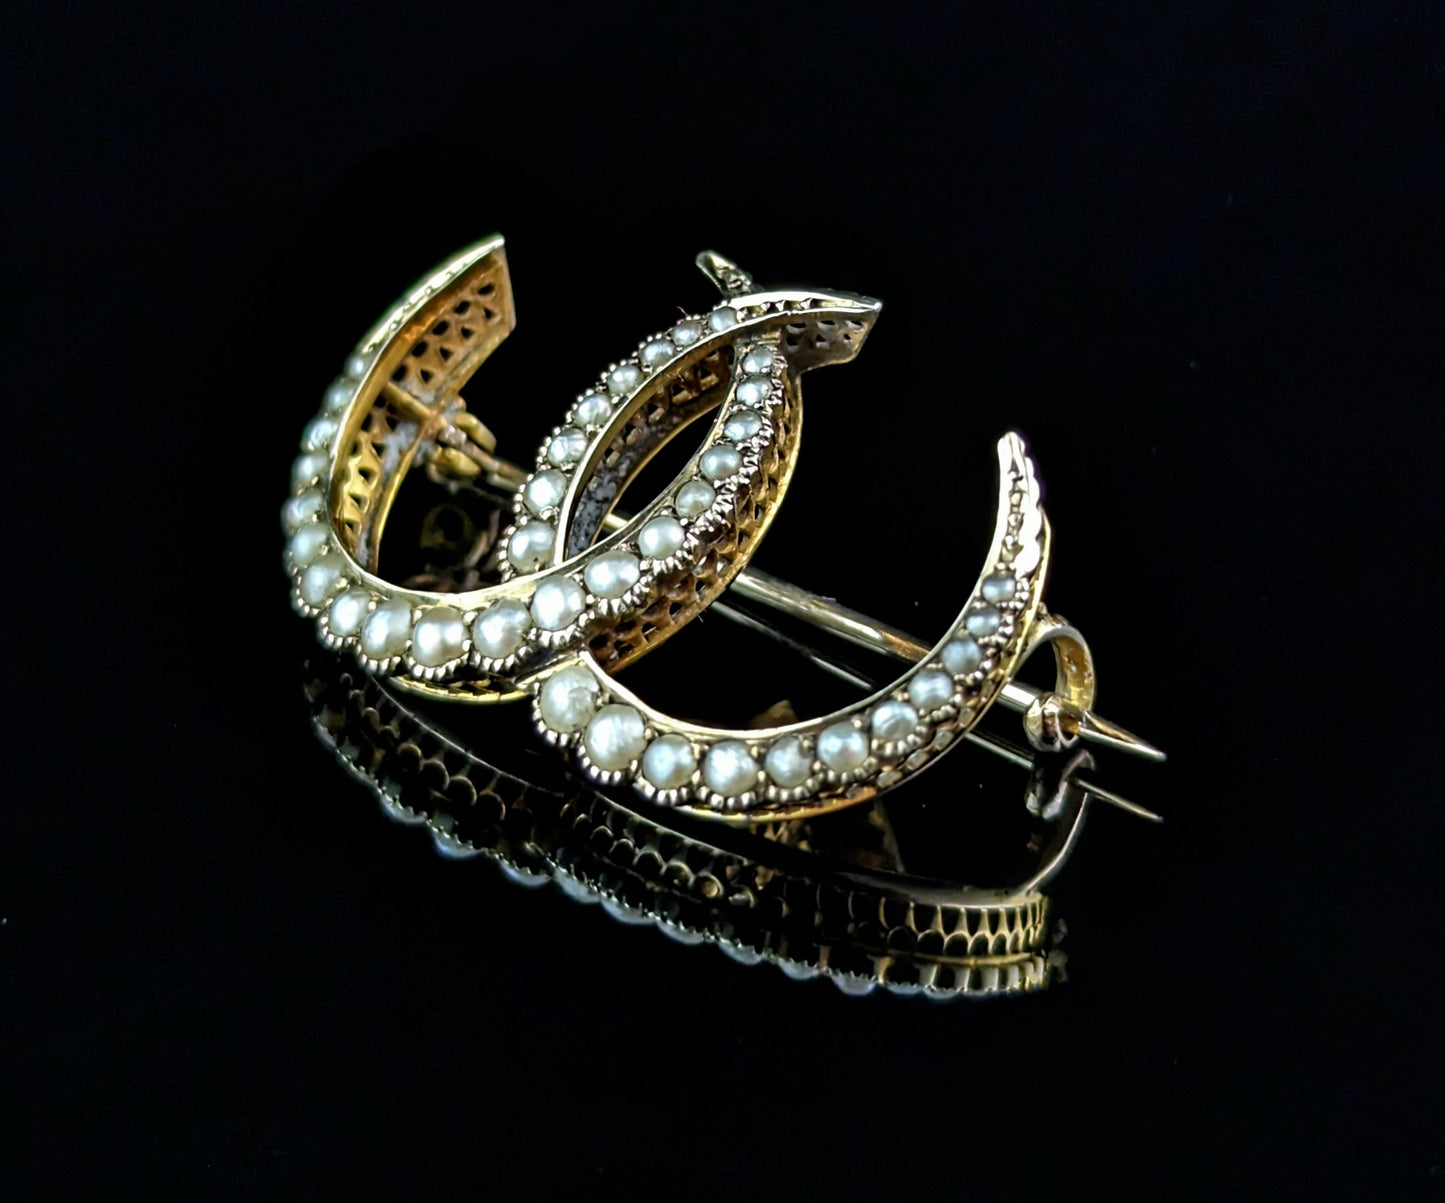 Antique 9ct gold and Pearl double crescent moon brooch, Murrle Bennett